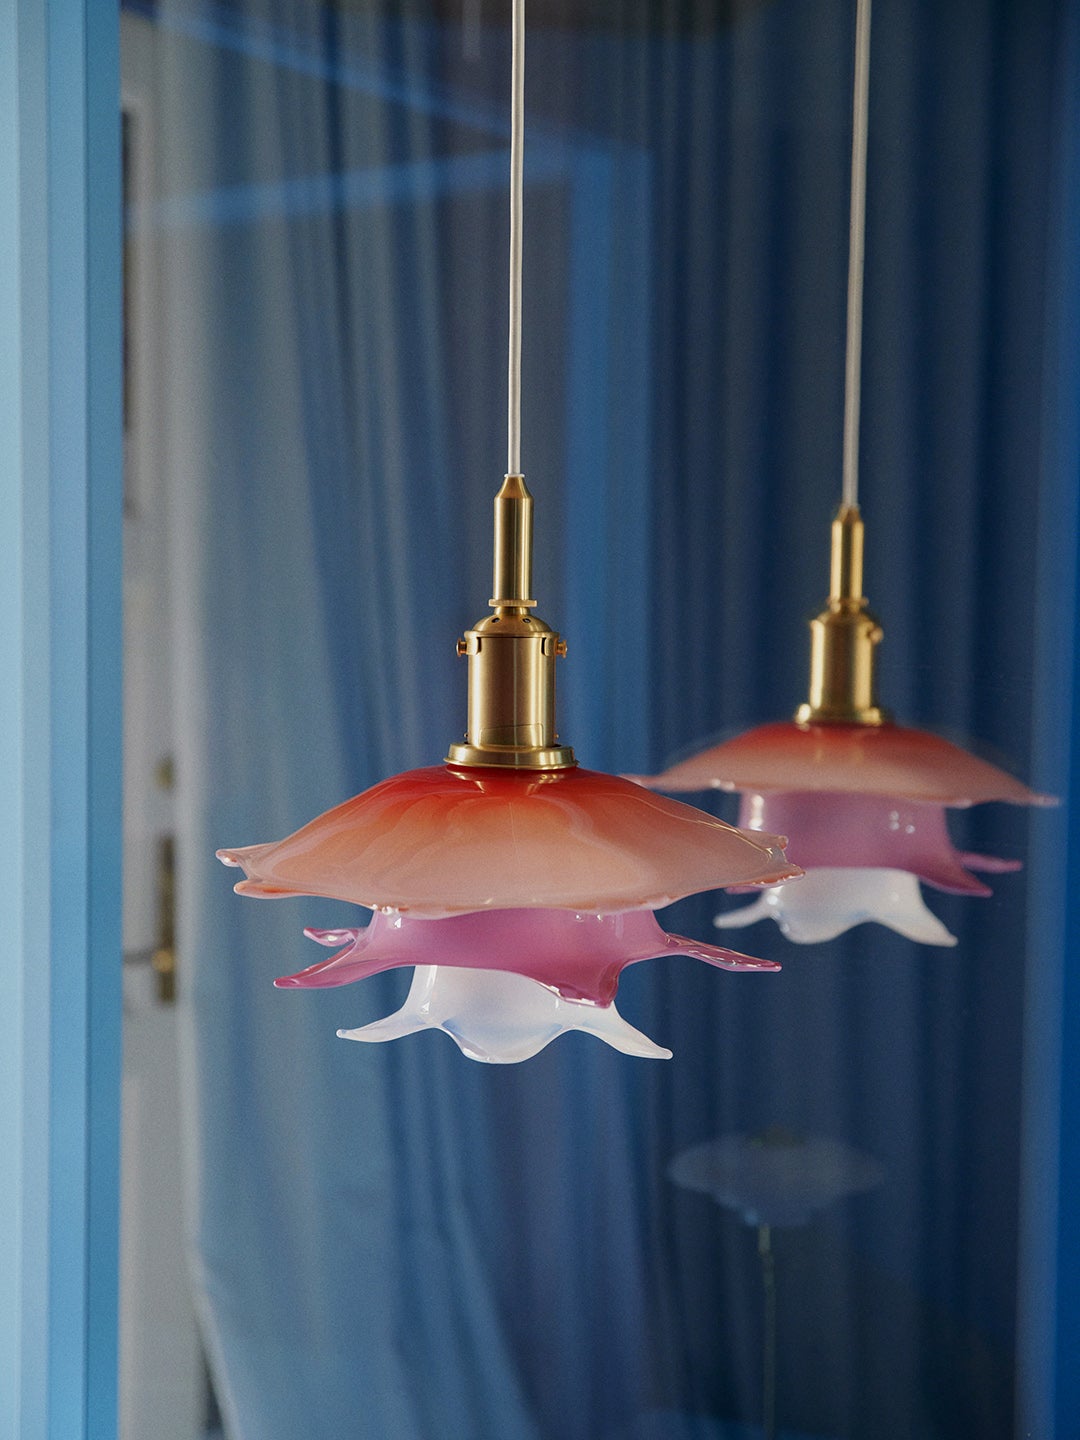 The Candy-Like Pendant Lamps I Spotted at Copenhagen’s Design Festival Are Sure to Sell Out